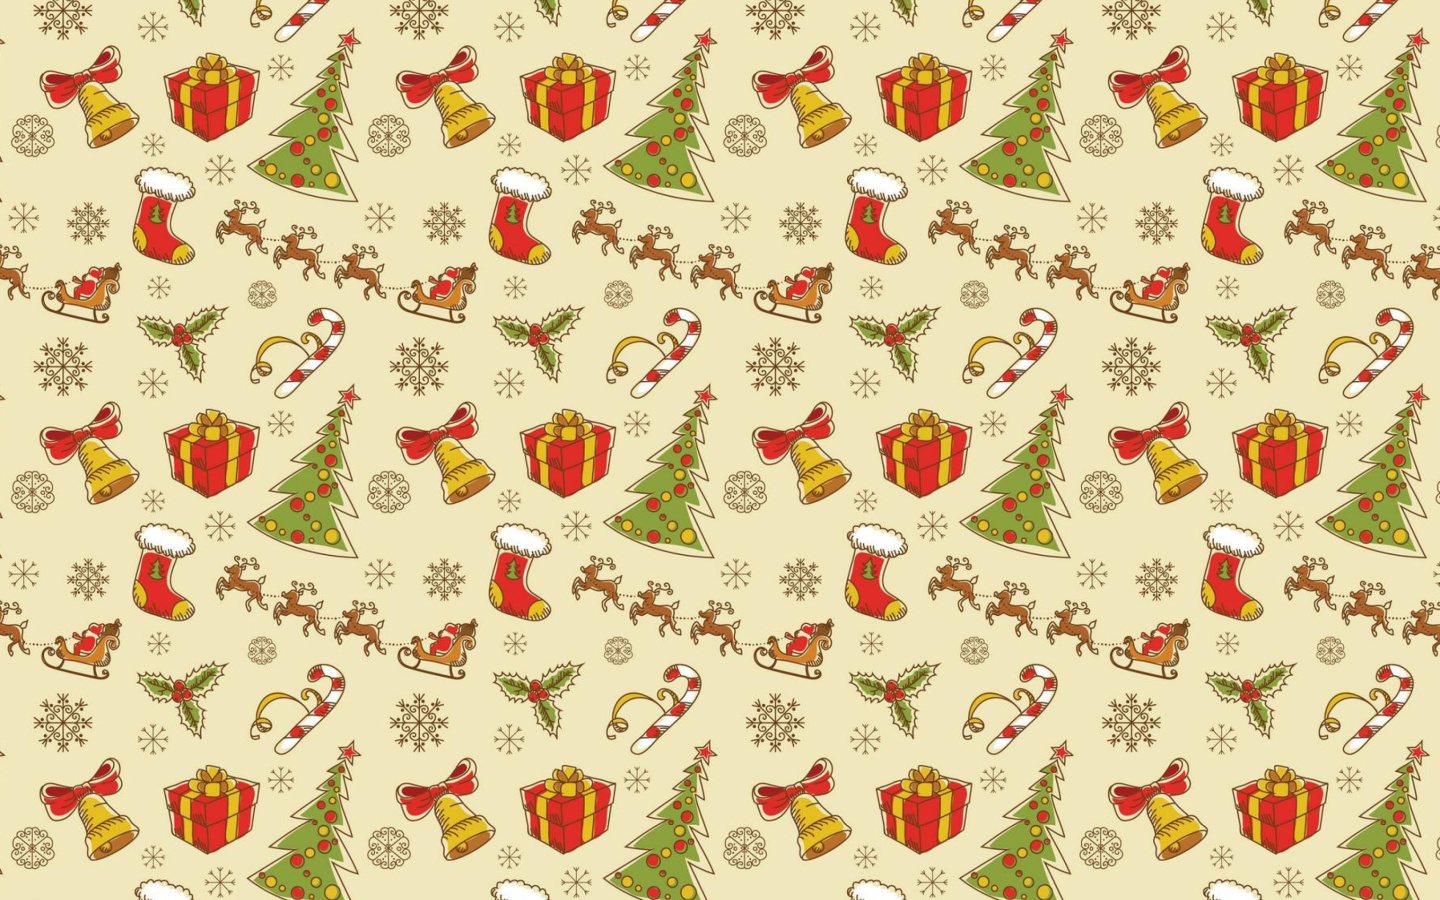 Das Christmas Gift Boxes Decorations Wallpaper 1440x900